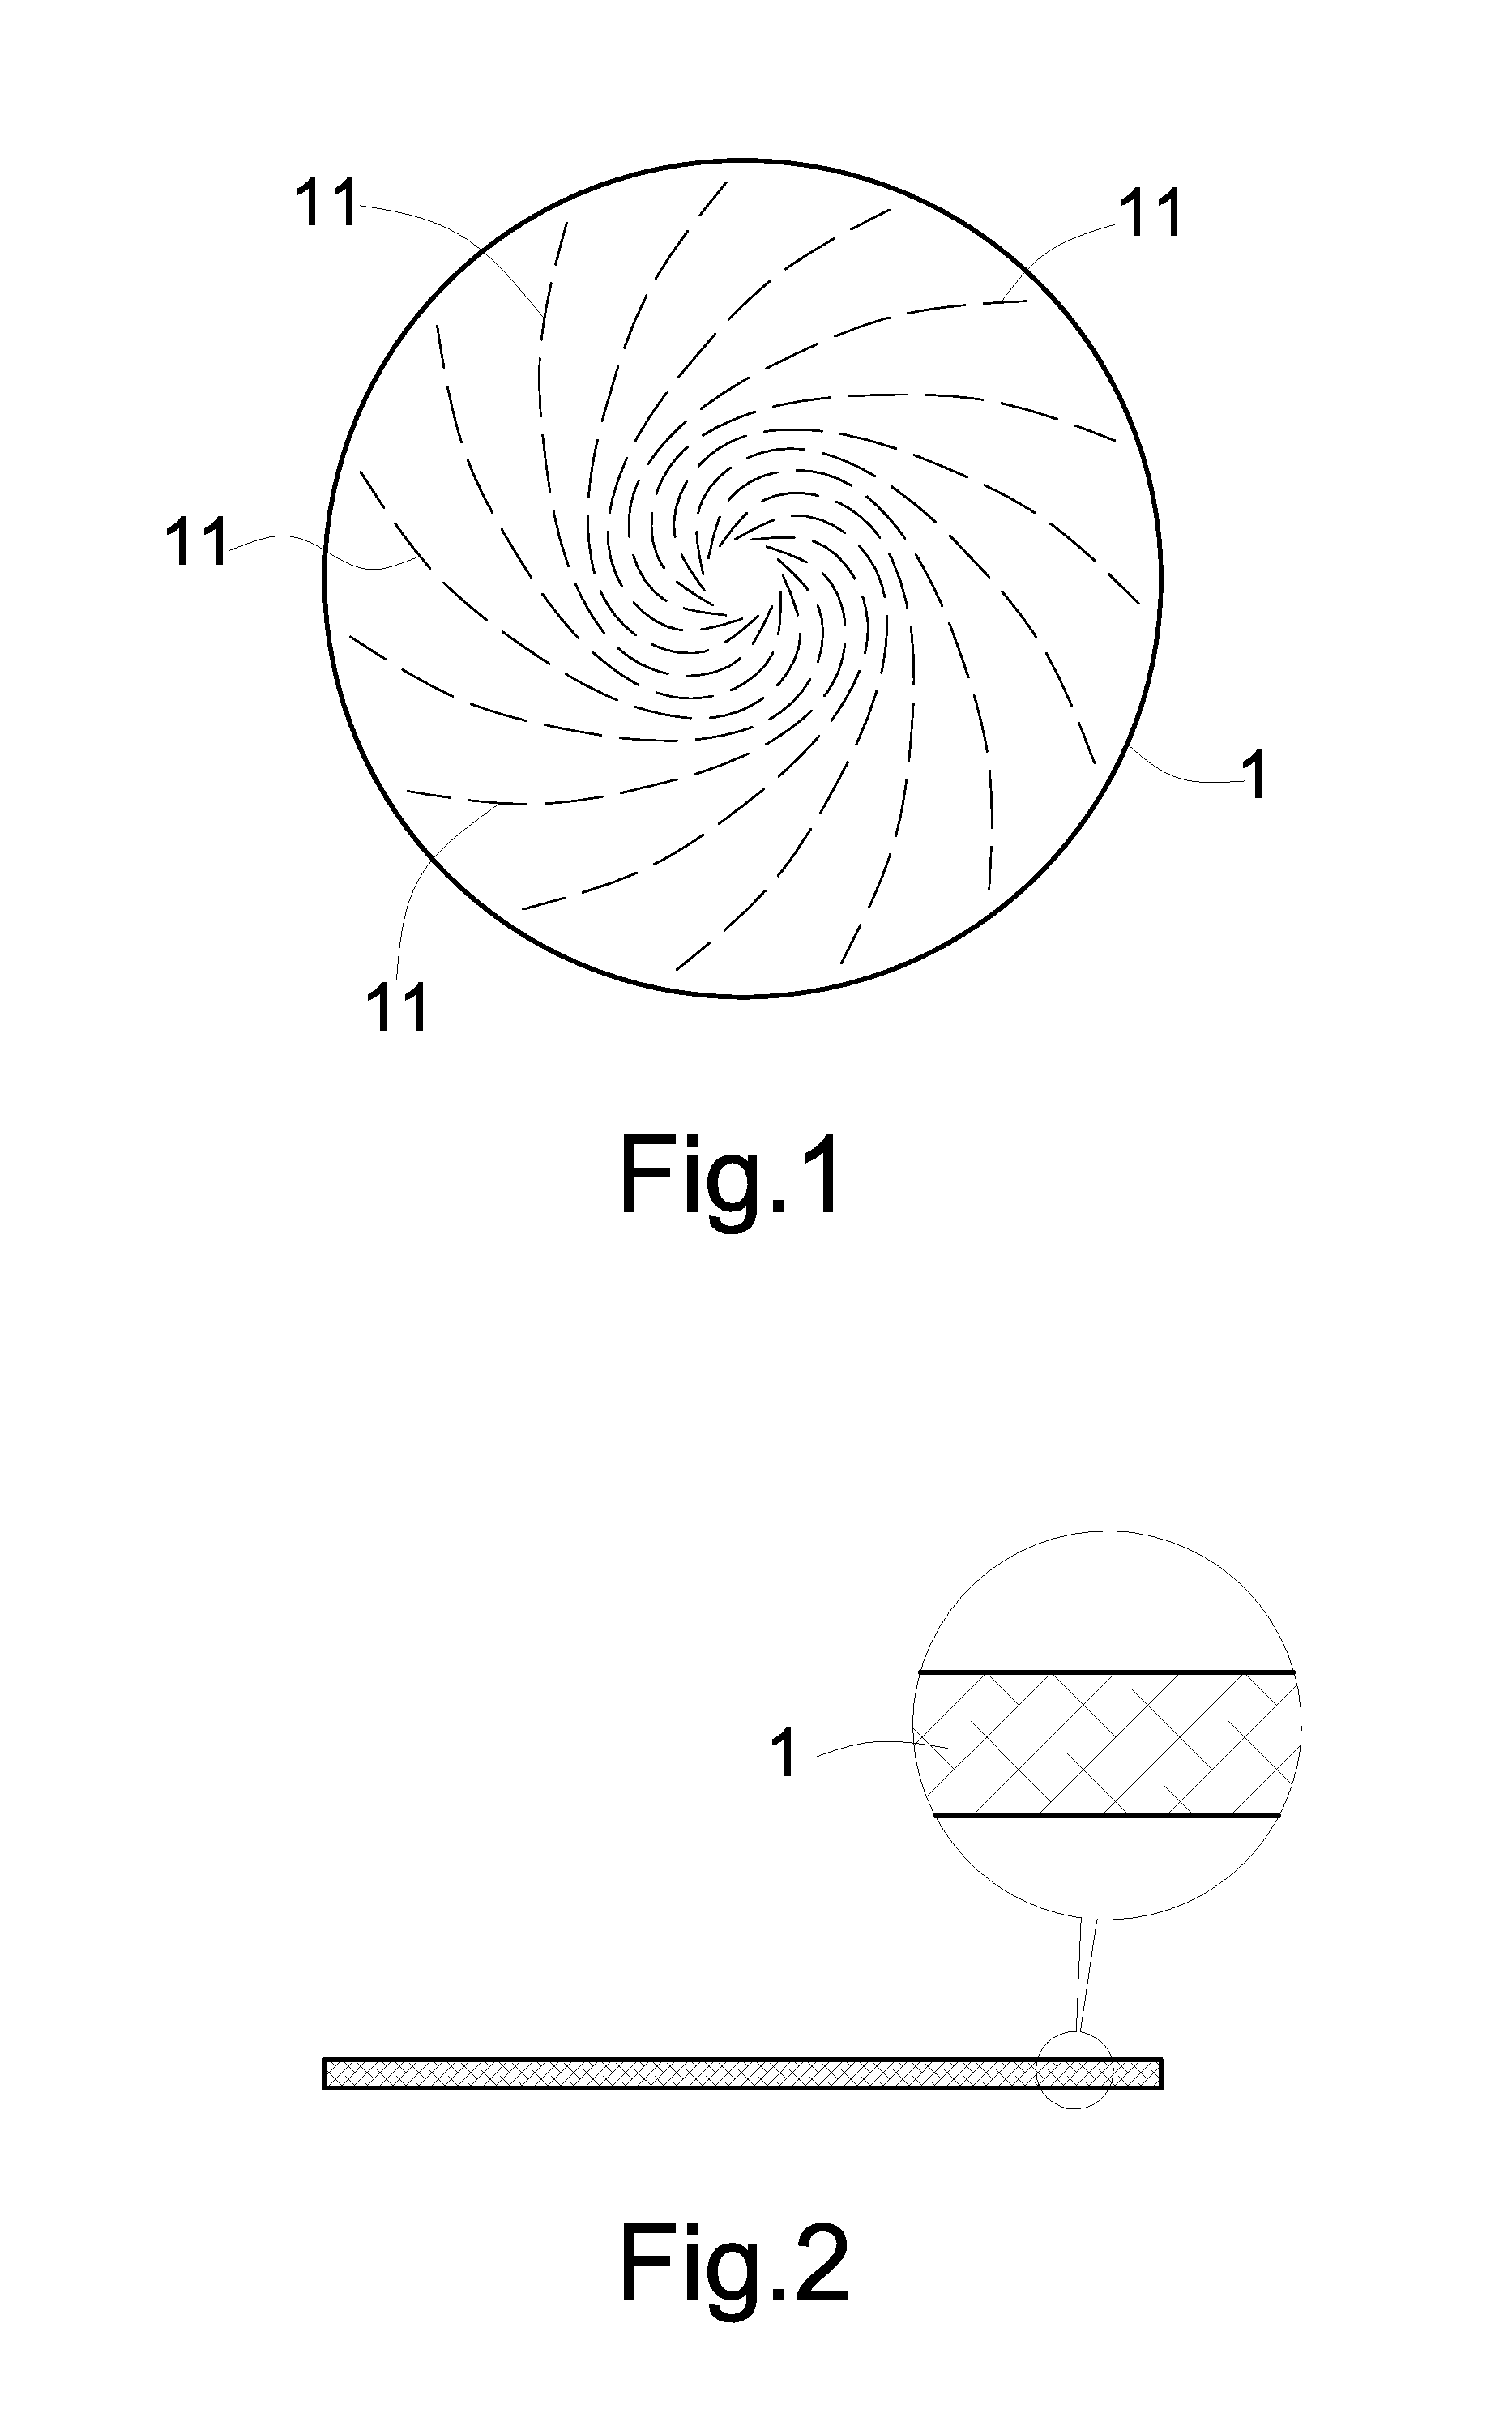 System for generating electrical energy through the input of energy to alignment buckypaper